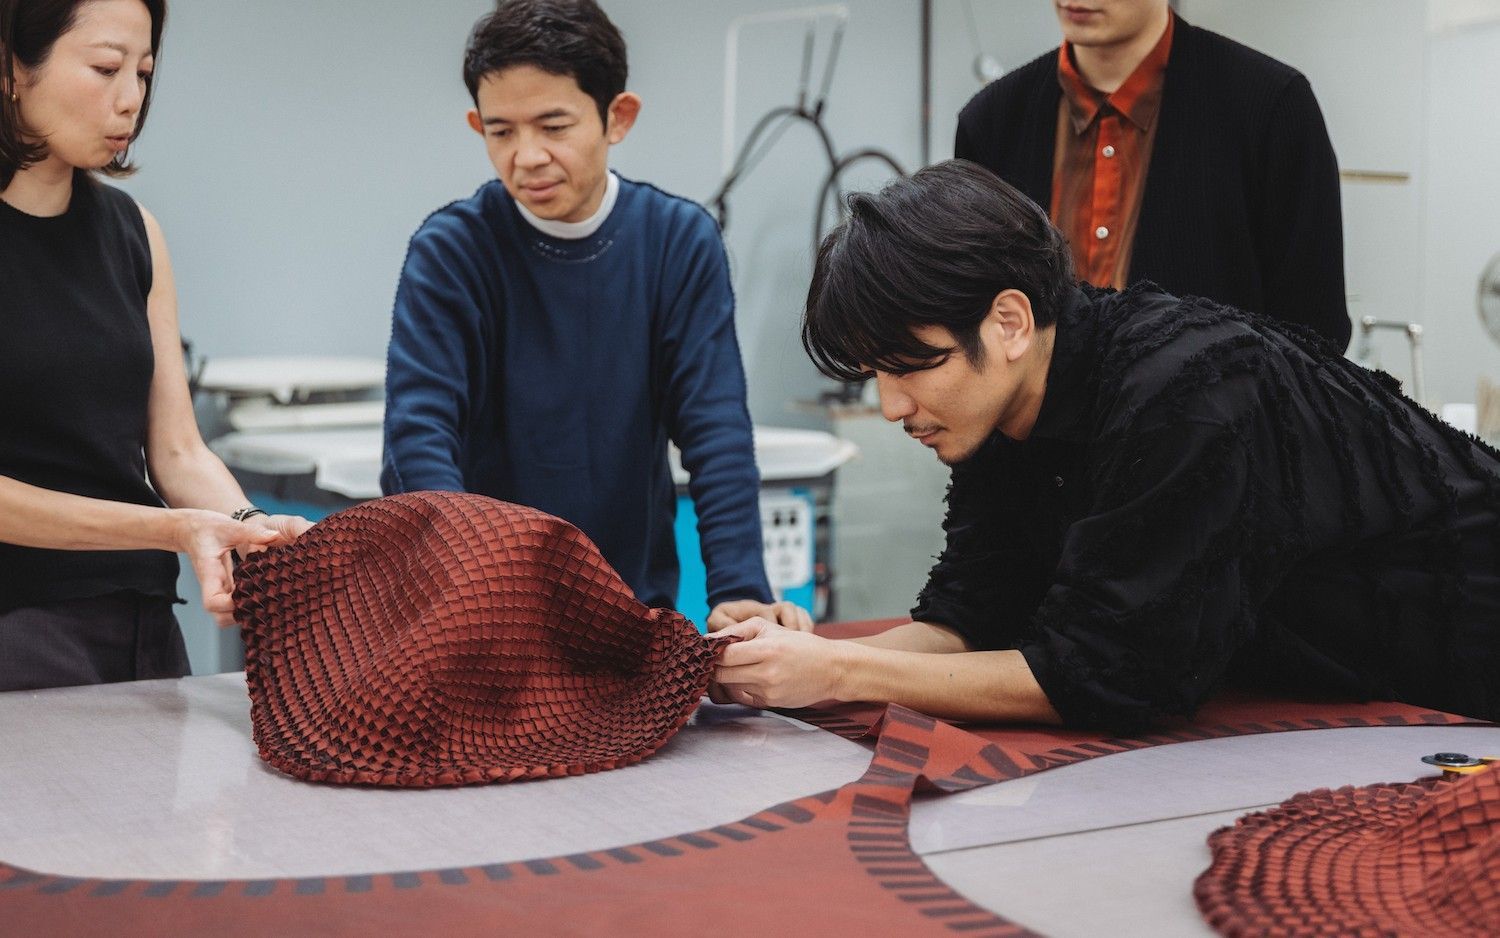 Beyond the limits of fashion with Issey Miyake's A-POC ABLE project